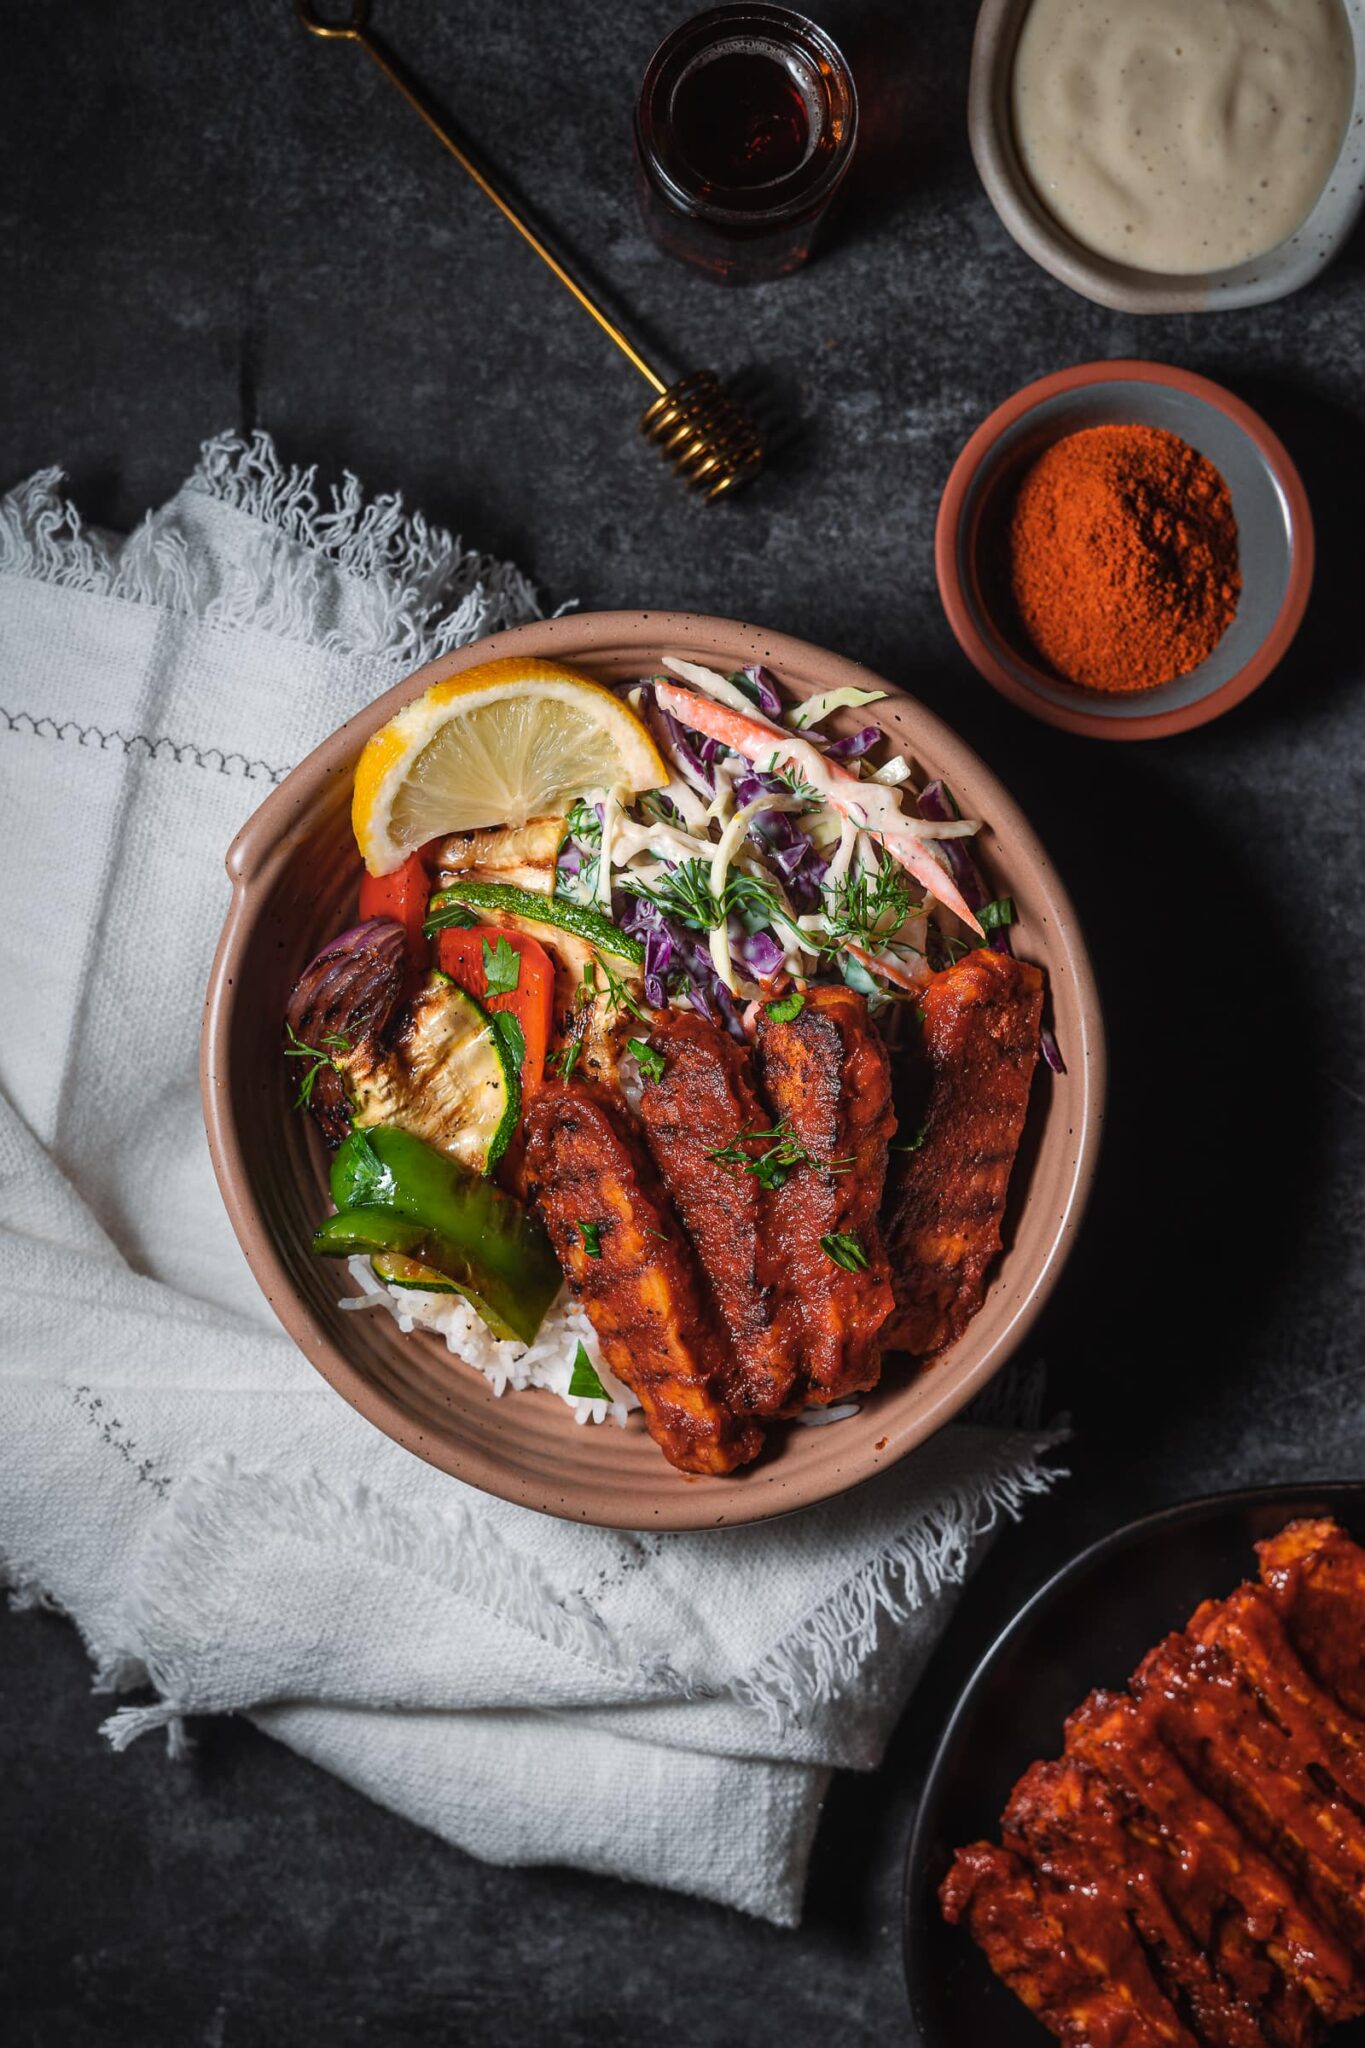 bbq tempeh served with grilled veggies and slaw.